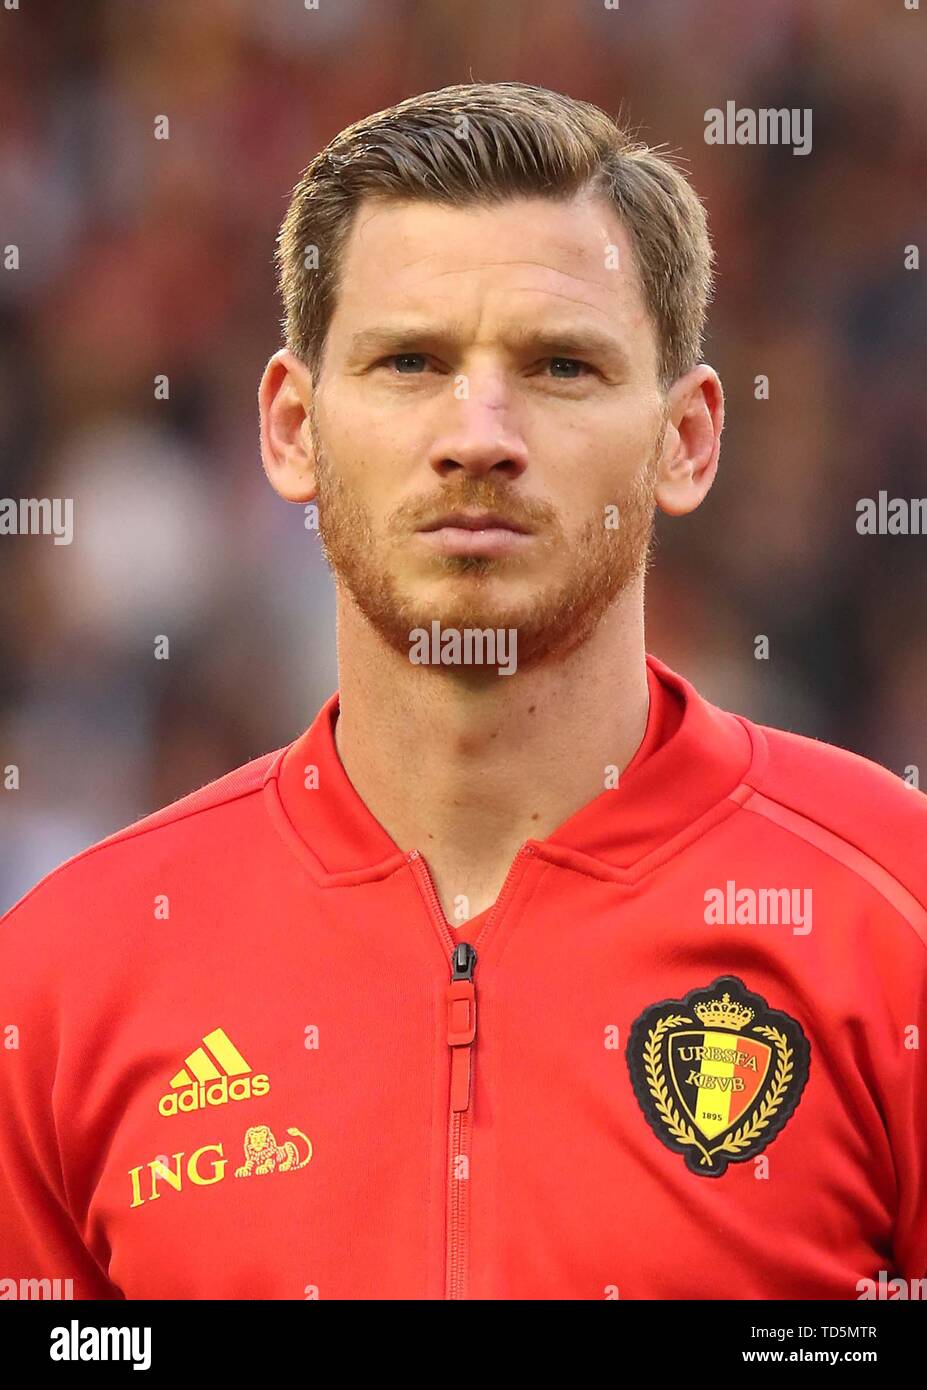 Belgium's Jan Vertonghen prior to kick-off during the UEFA Euro 2020 Qualifying, Group I match at the King Baudouin Stadium, Brussels. PRESS ASSOCIATION Photo. Picture date: Tuesday June 11, 2019. See PA story SOCCER Belgium. Photo credit should read: Bradley Collyer/PA Wire. Stock Photo